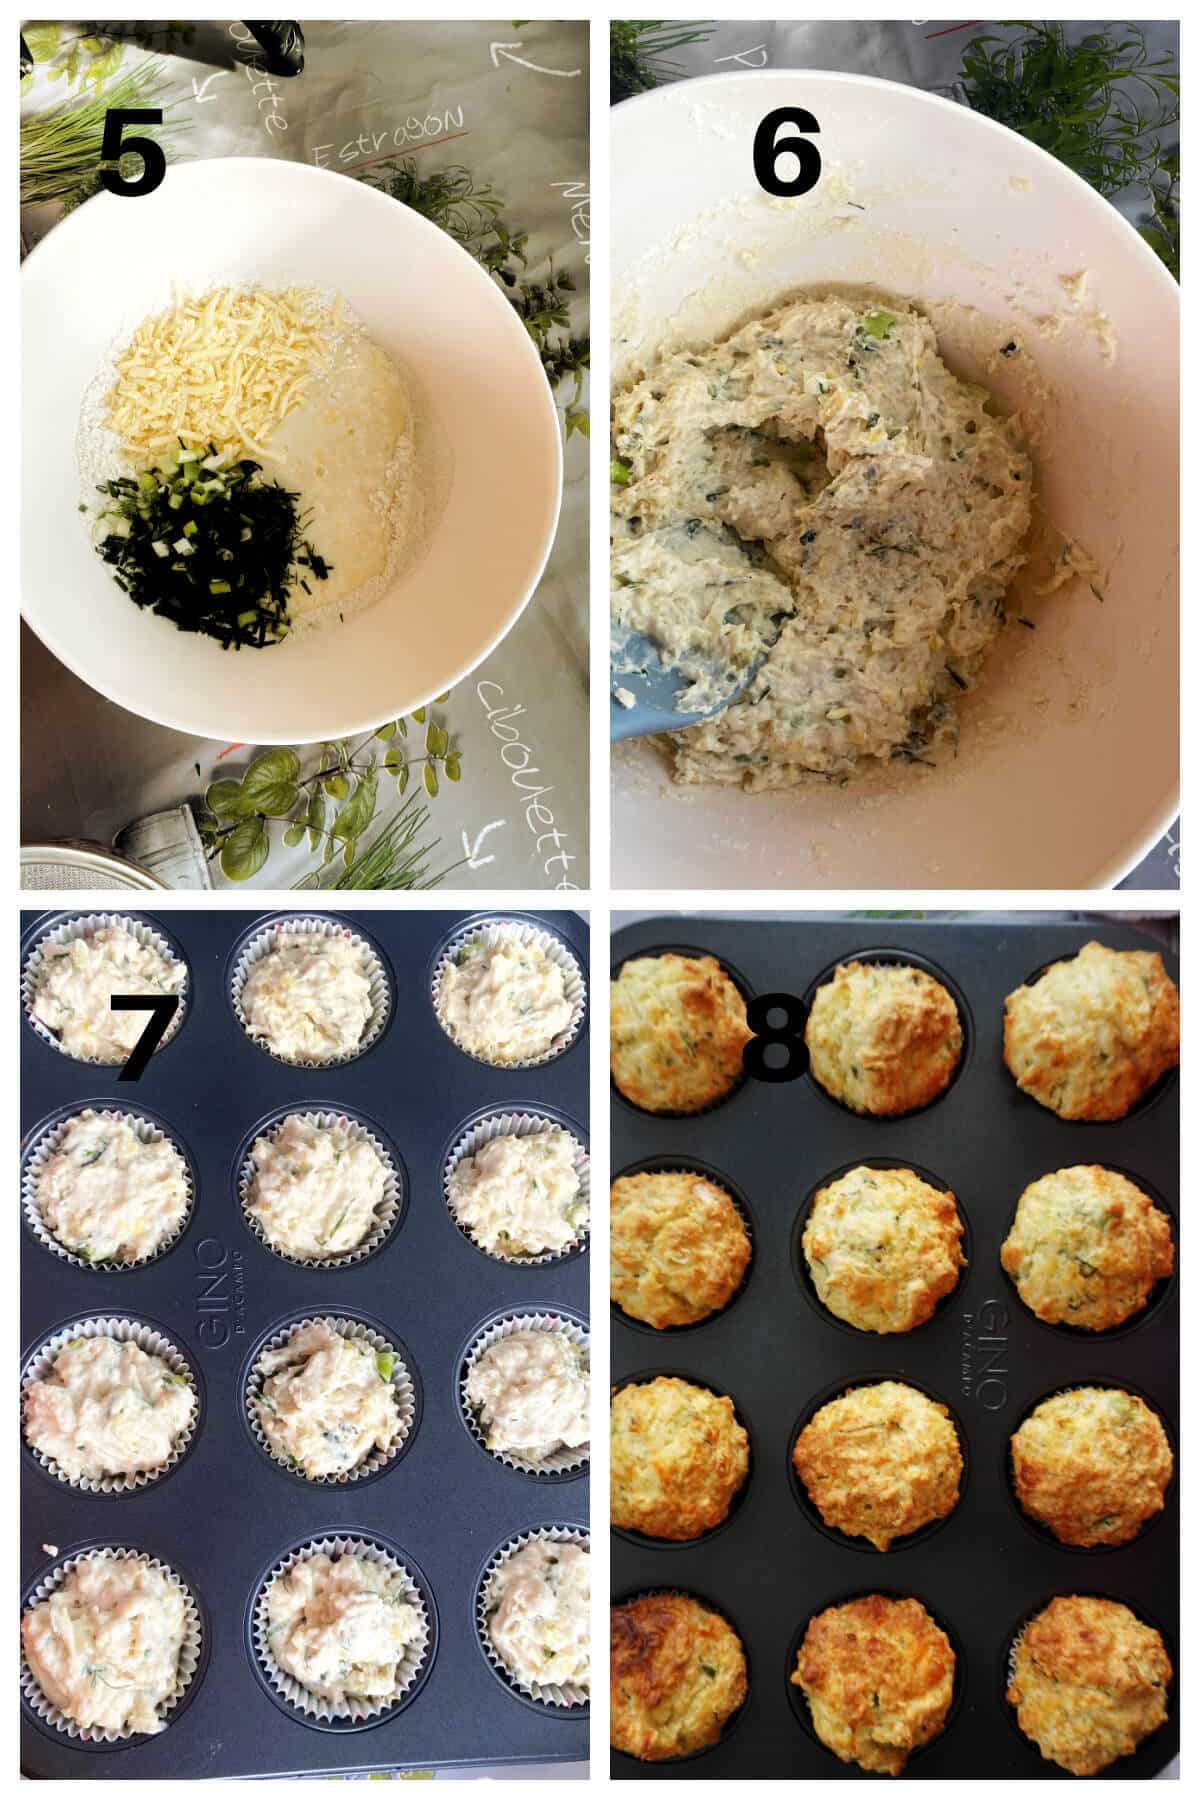 Collage of 4 photos to show how to make savoury muffins.